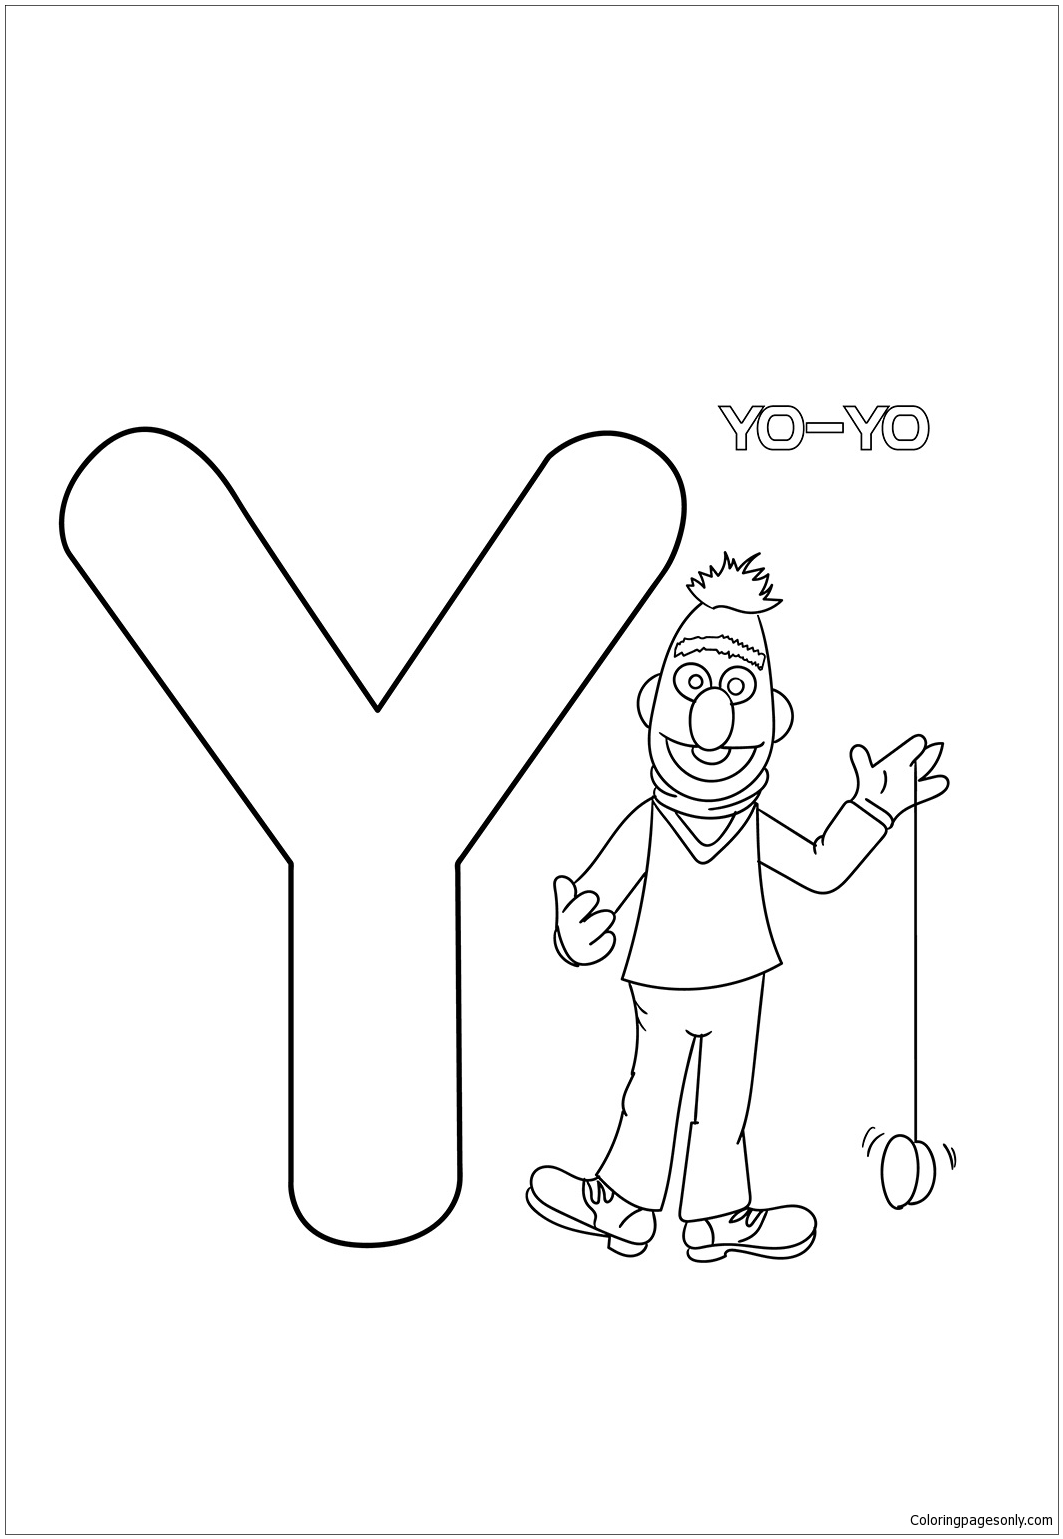 The Its Play Time Coloring Pages - Letter Y Coloring Pages - Coloring